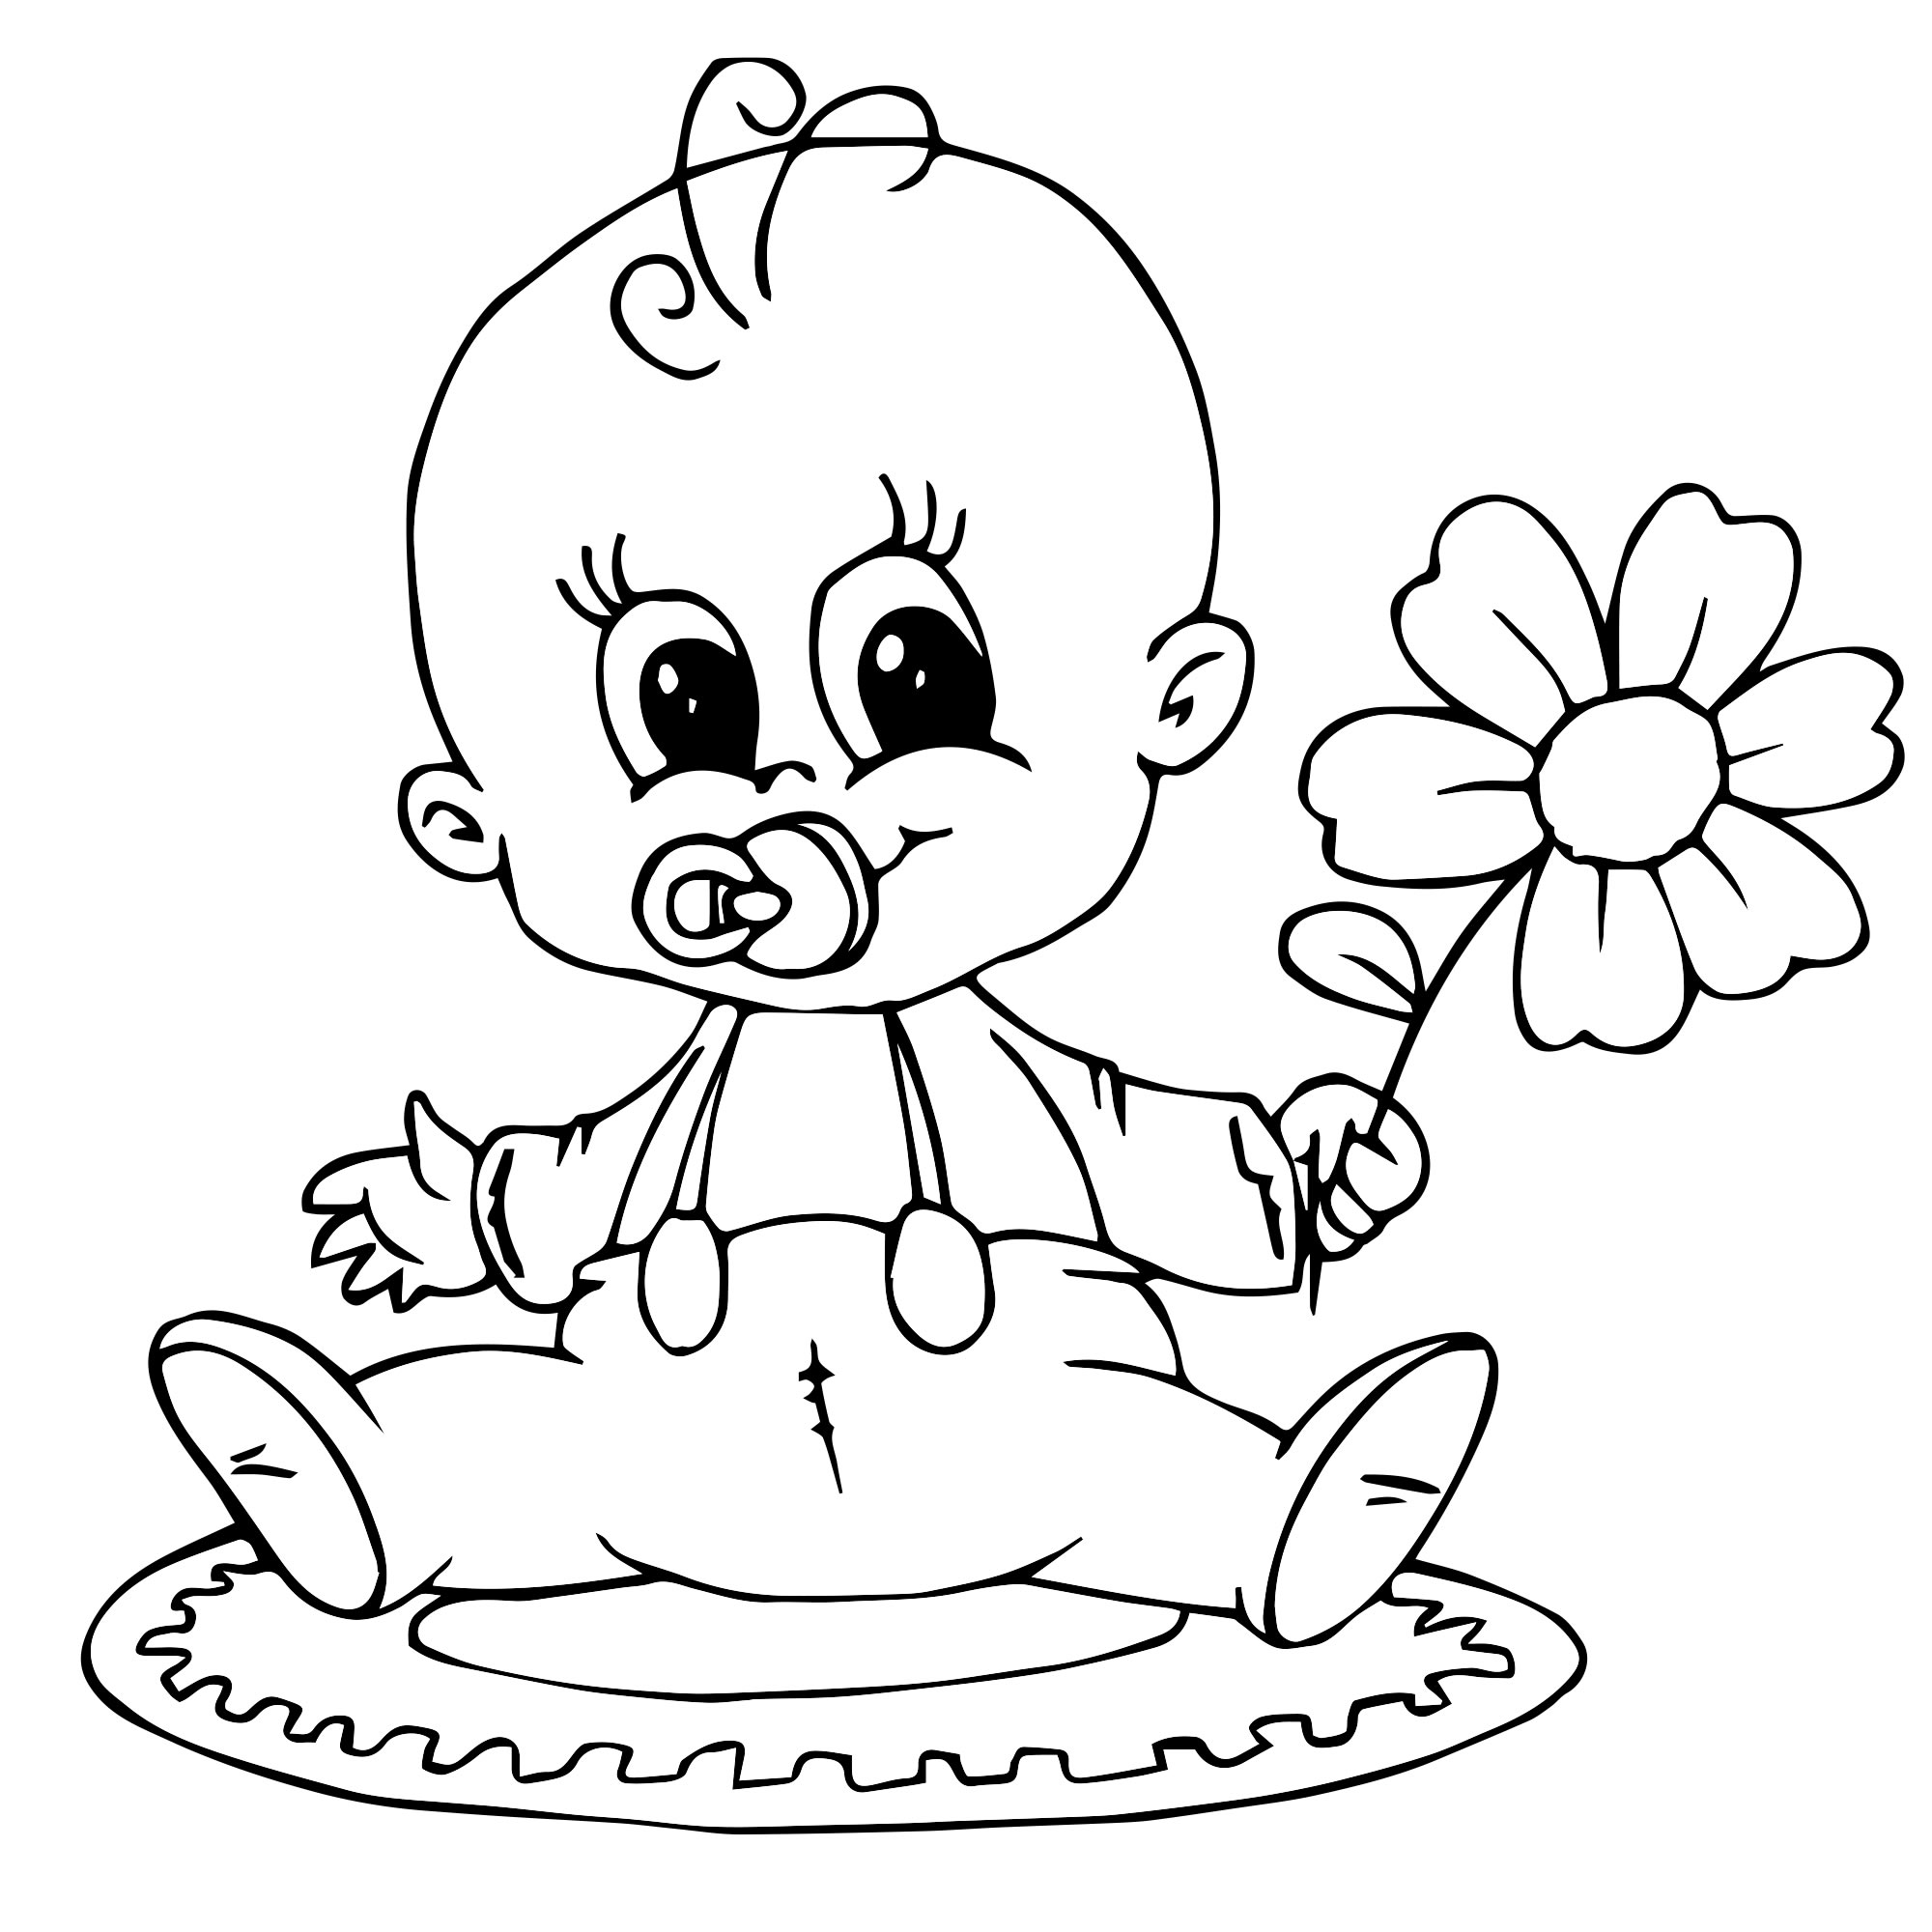 Delicate coloring pages for dolls